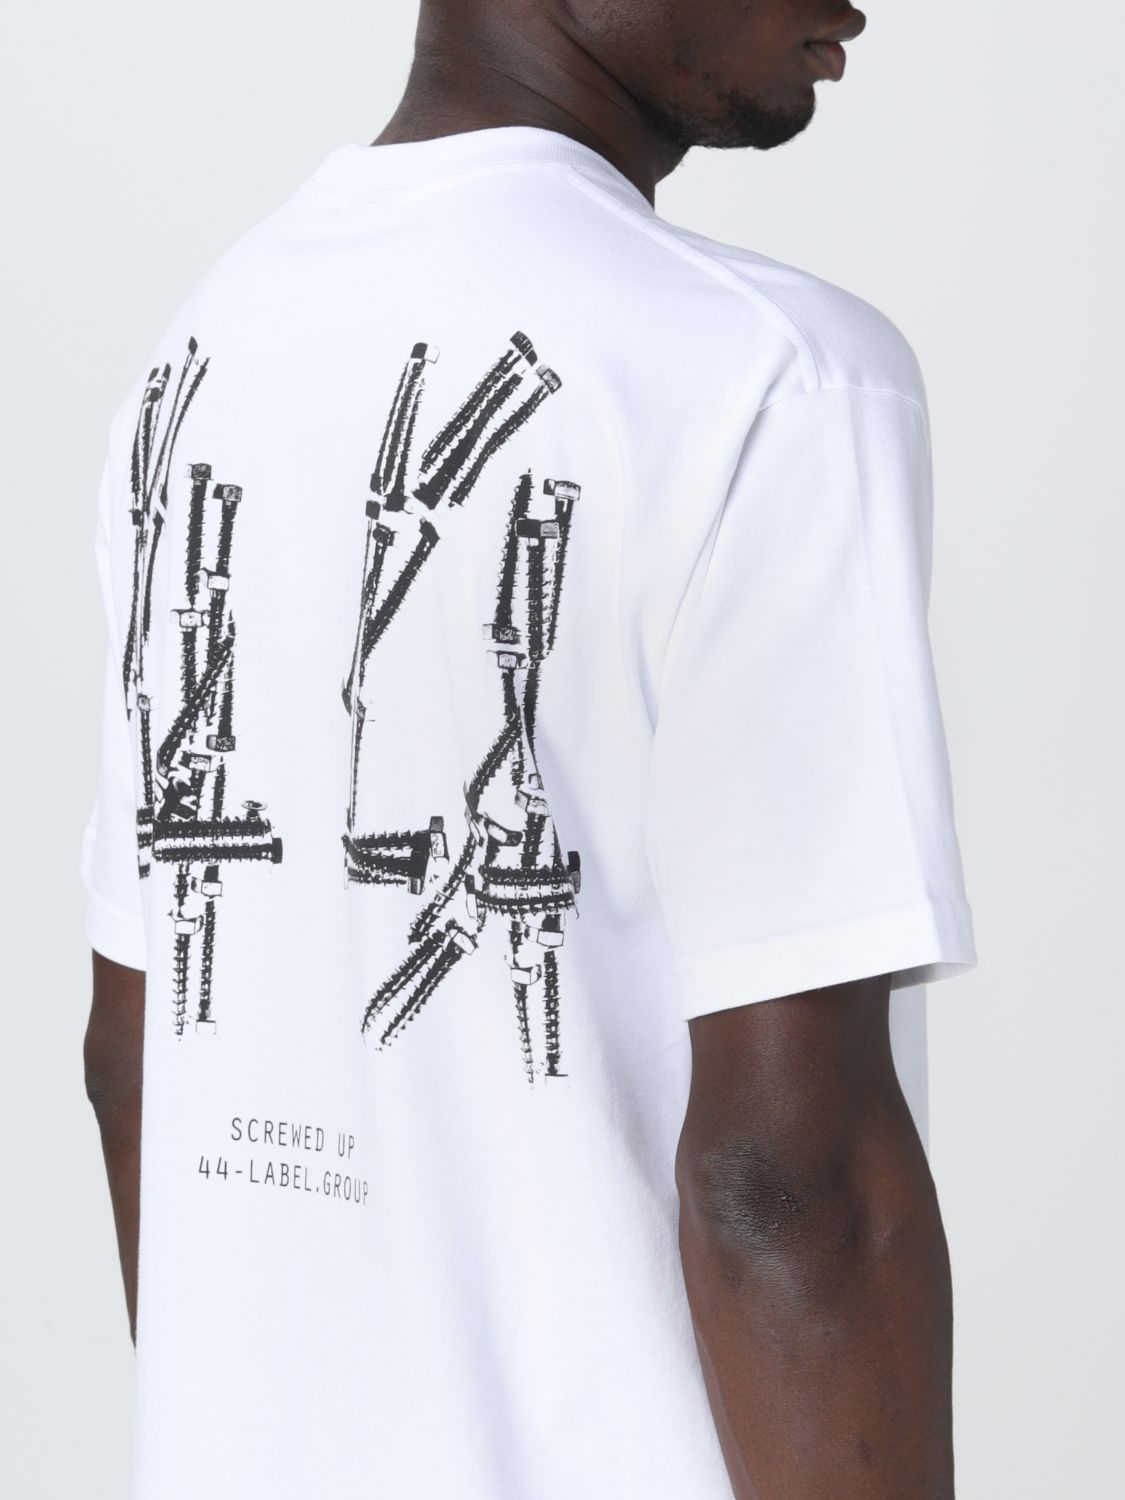 44 LABEL GROUP: T-shirt homme - Blanc | T-Shirt 44 Label Group